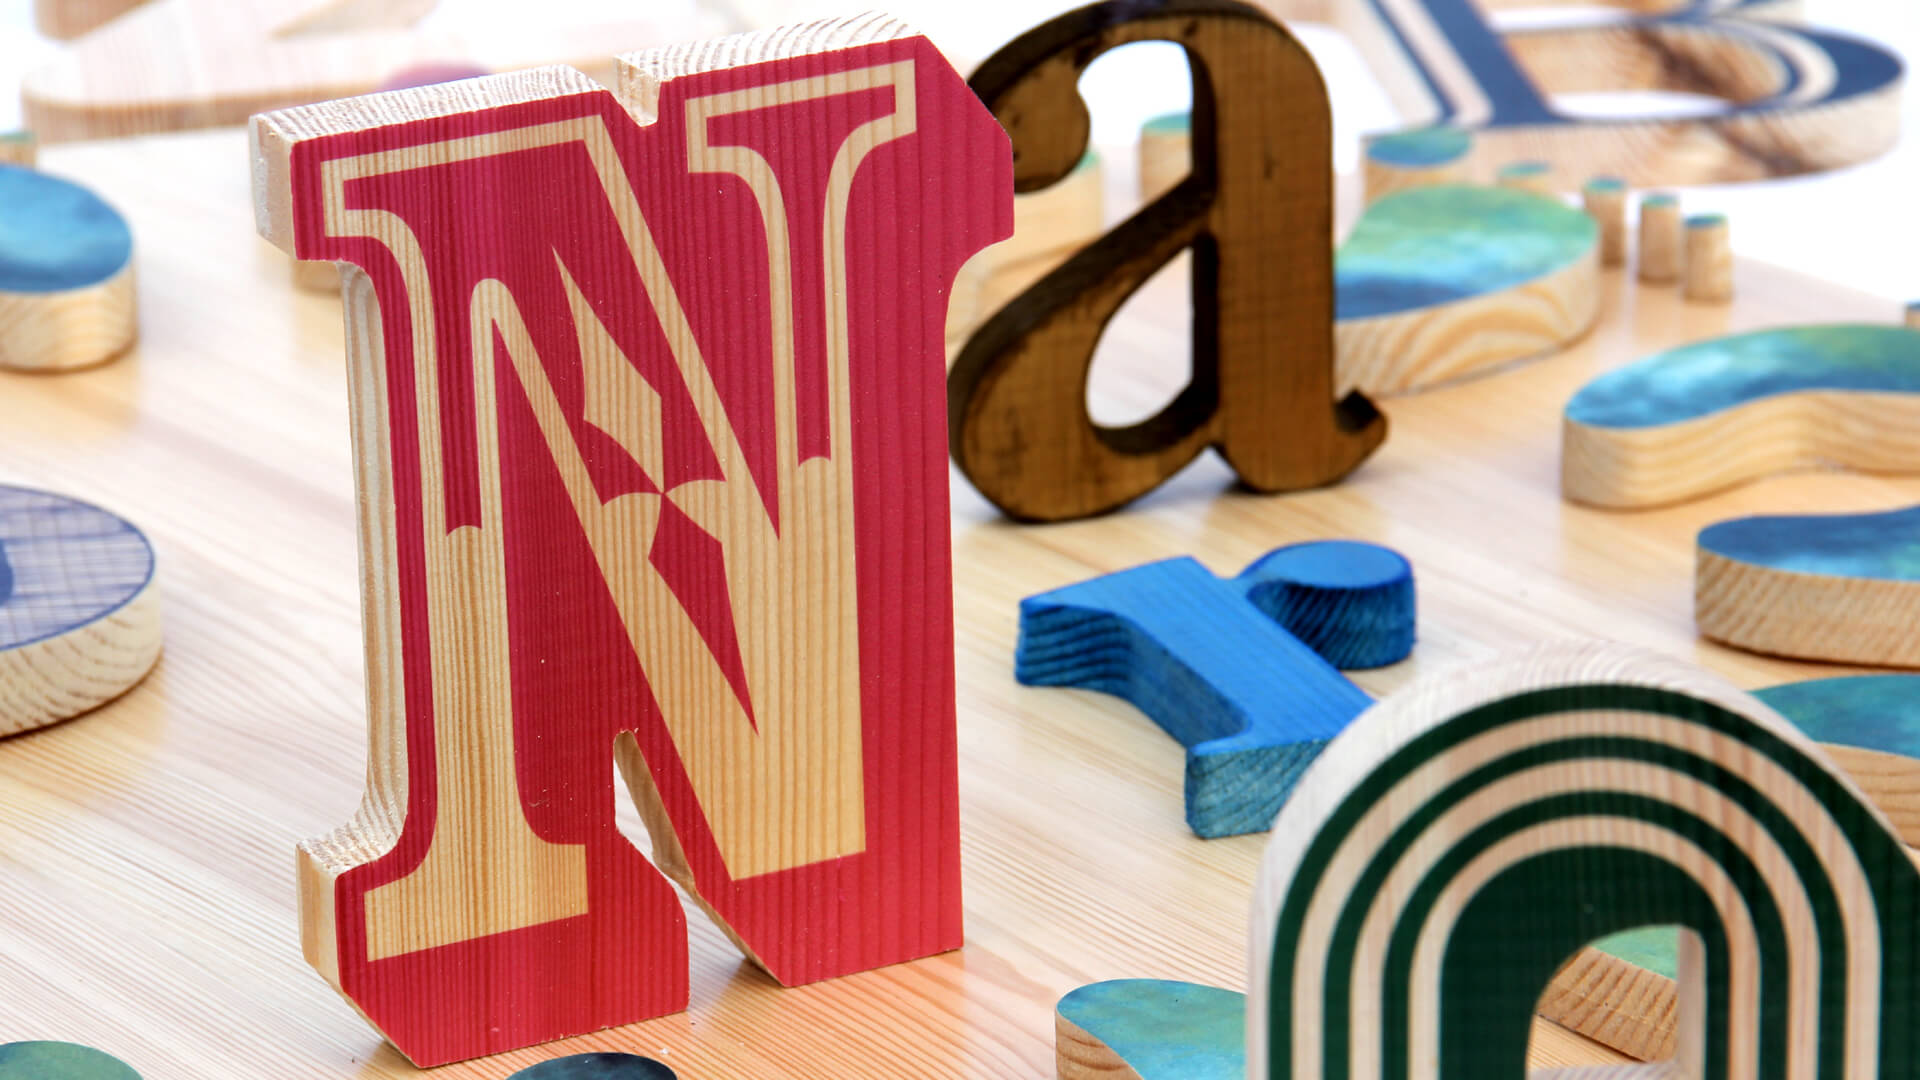 wood letters - letters-of-wood-letters-decorative-letters-wood-letters-plywood-letters